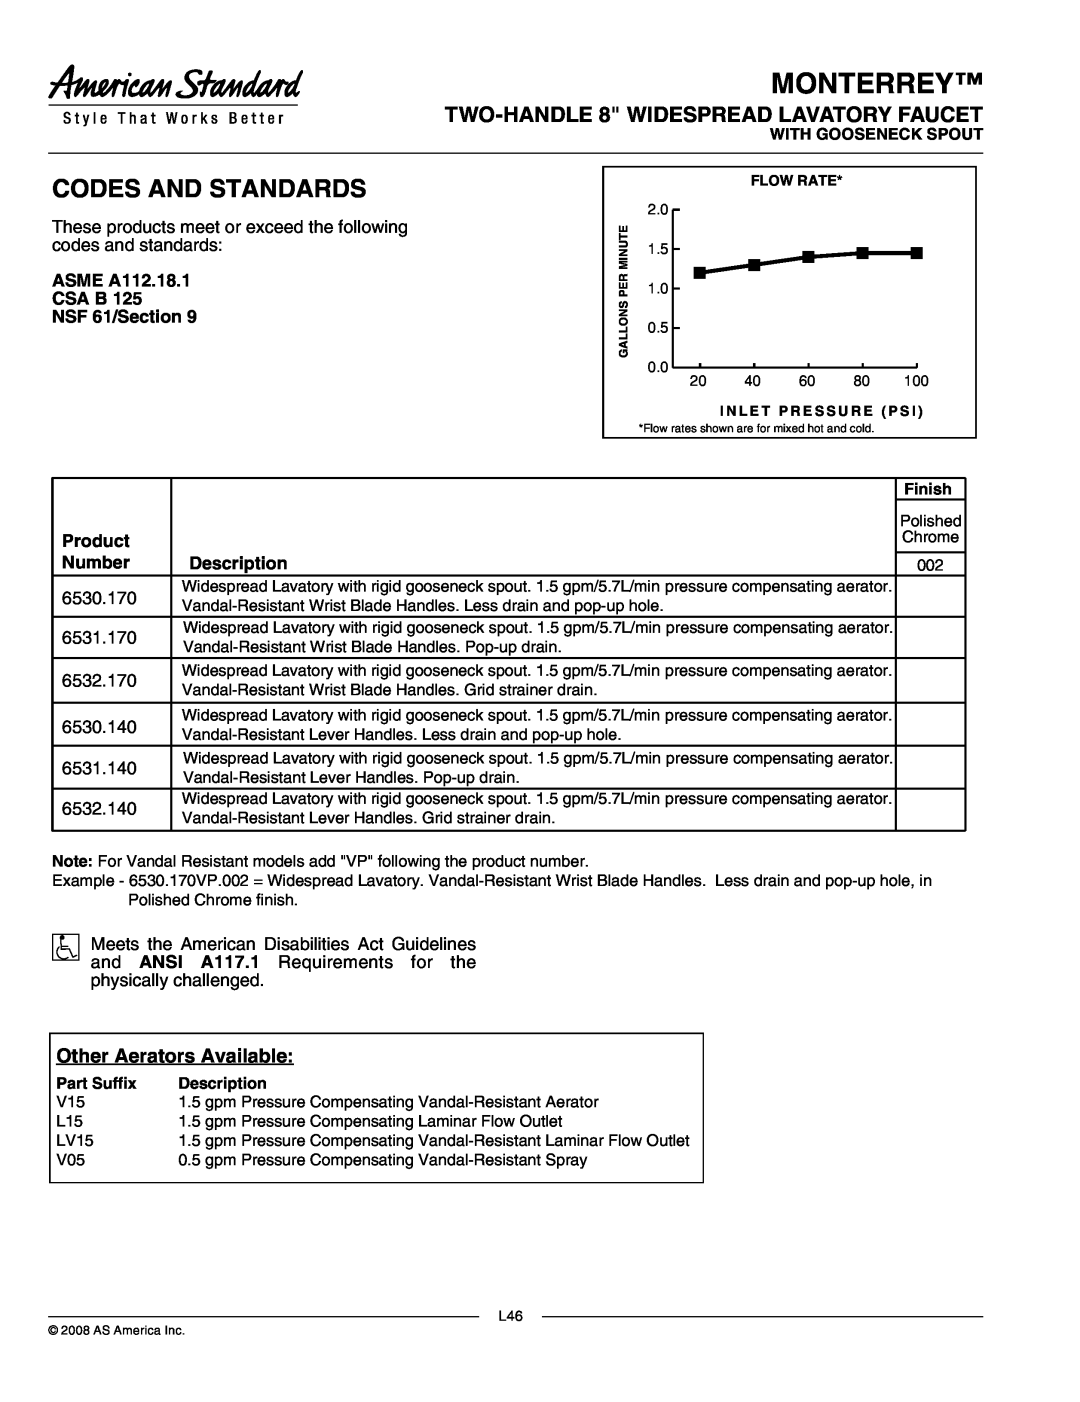 American Standard 6531.170 manual ASME A112.18.1 CSA B NSF 61/Section, Product, Number, Description, Finish, Part Suffix 